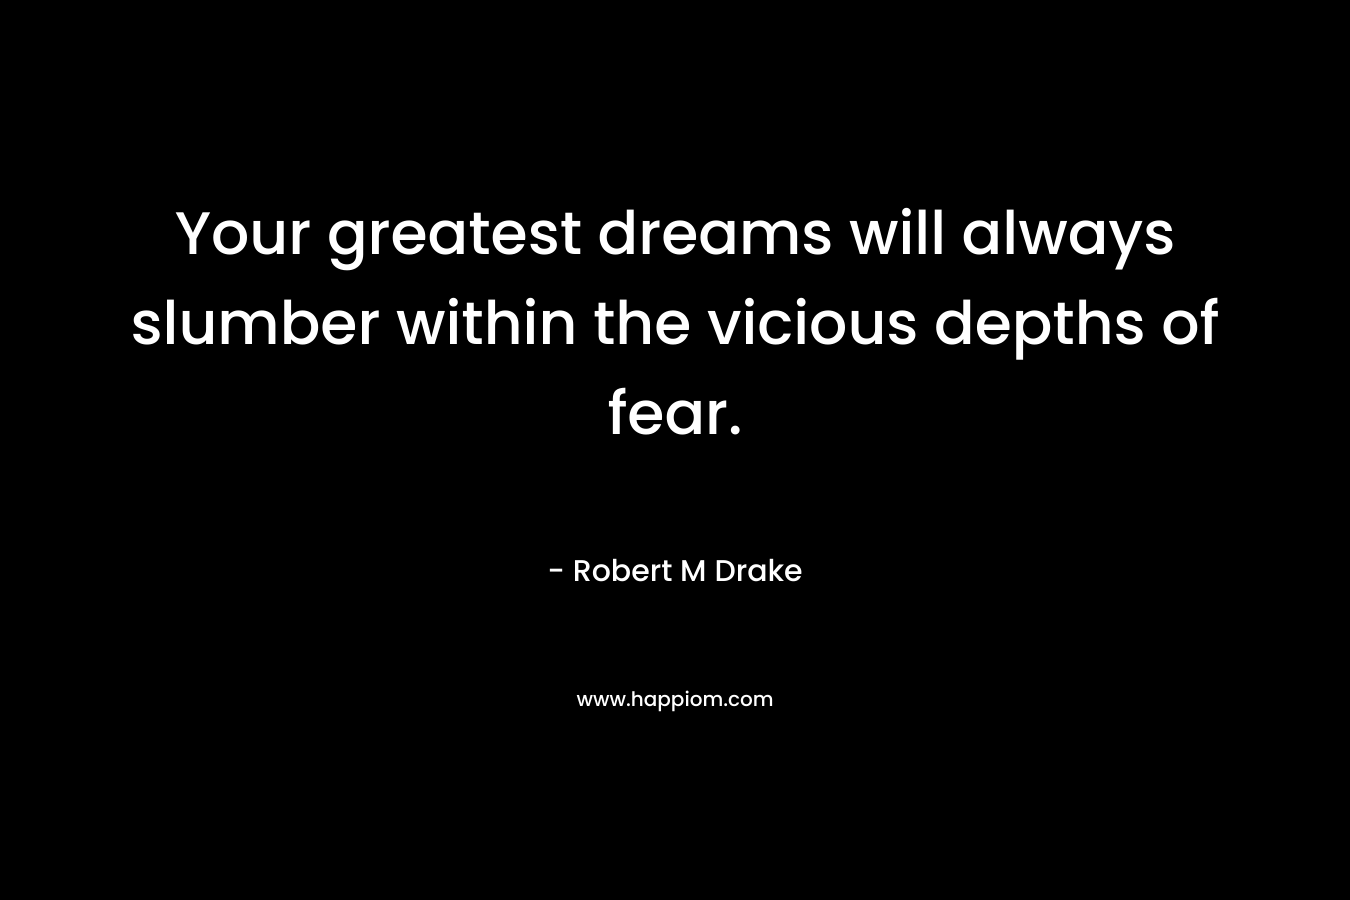 Your greatest dreams will always slumber within the vicious depths of fear. – Robert M Drake